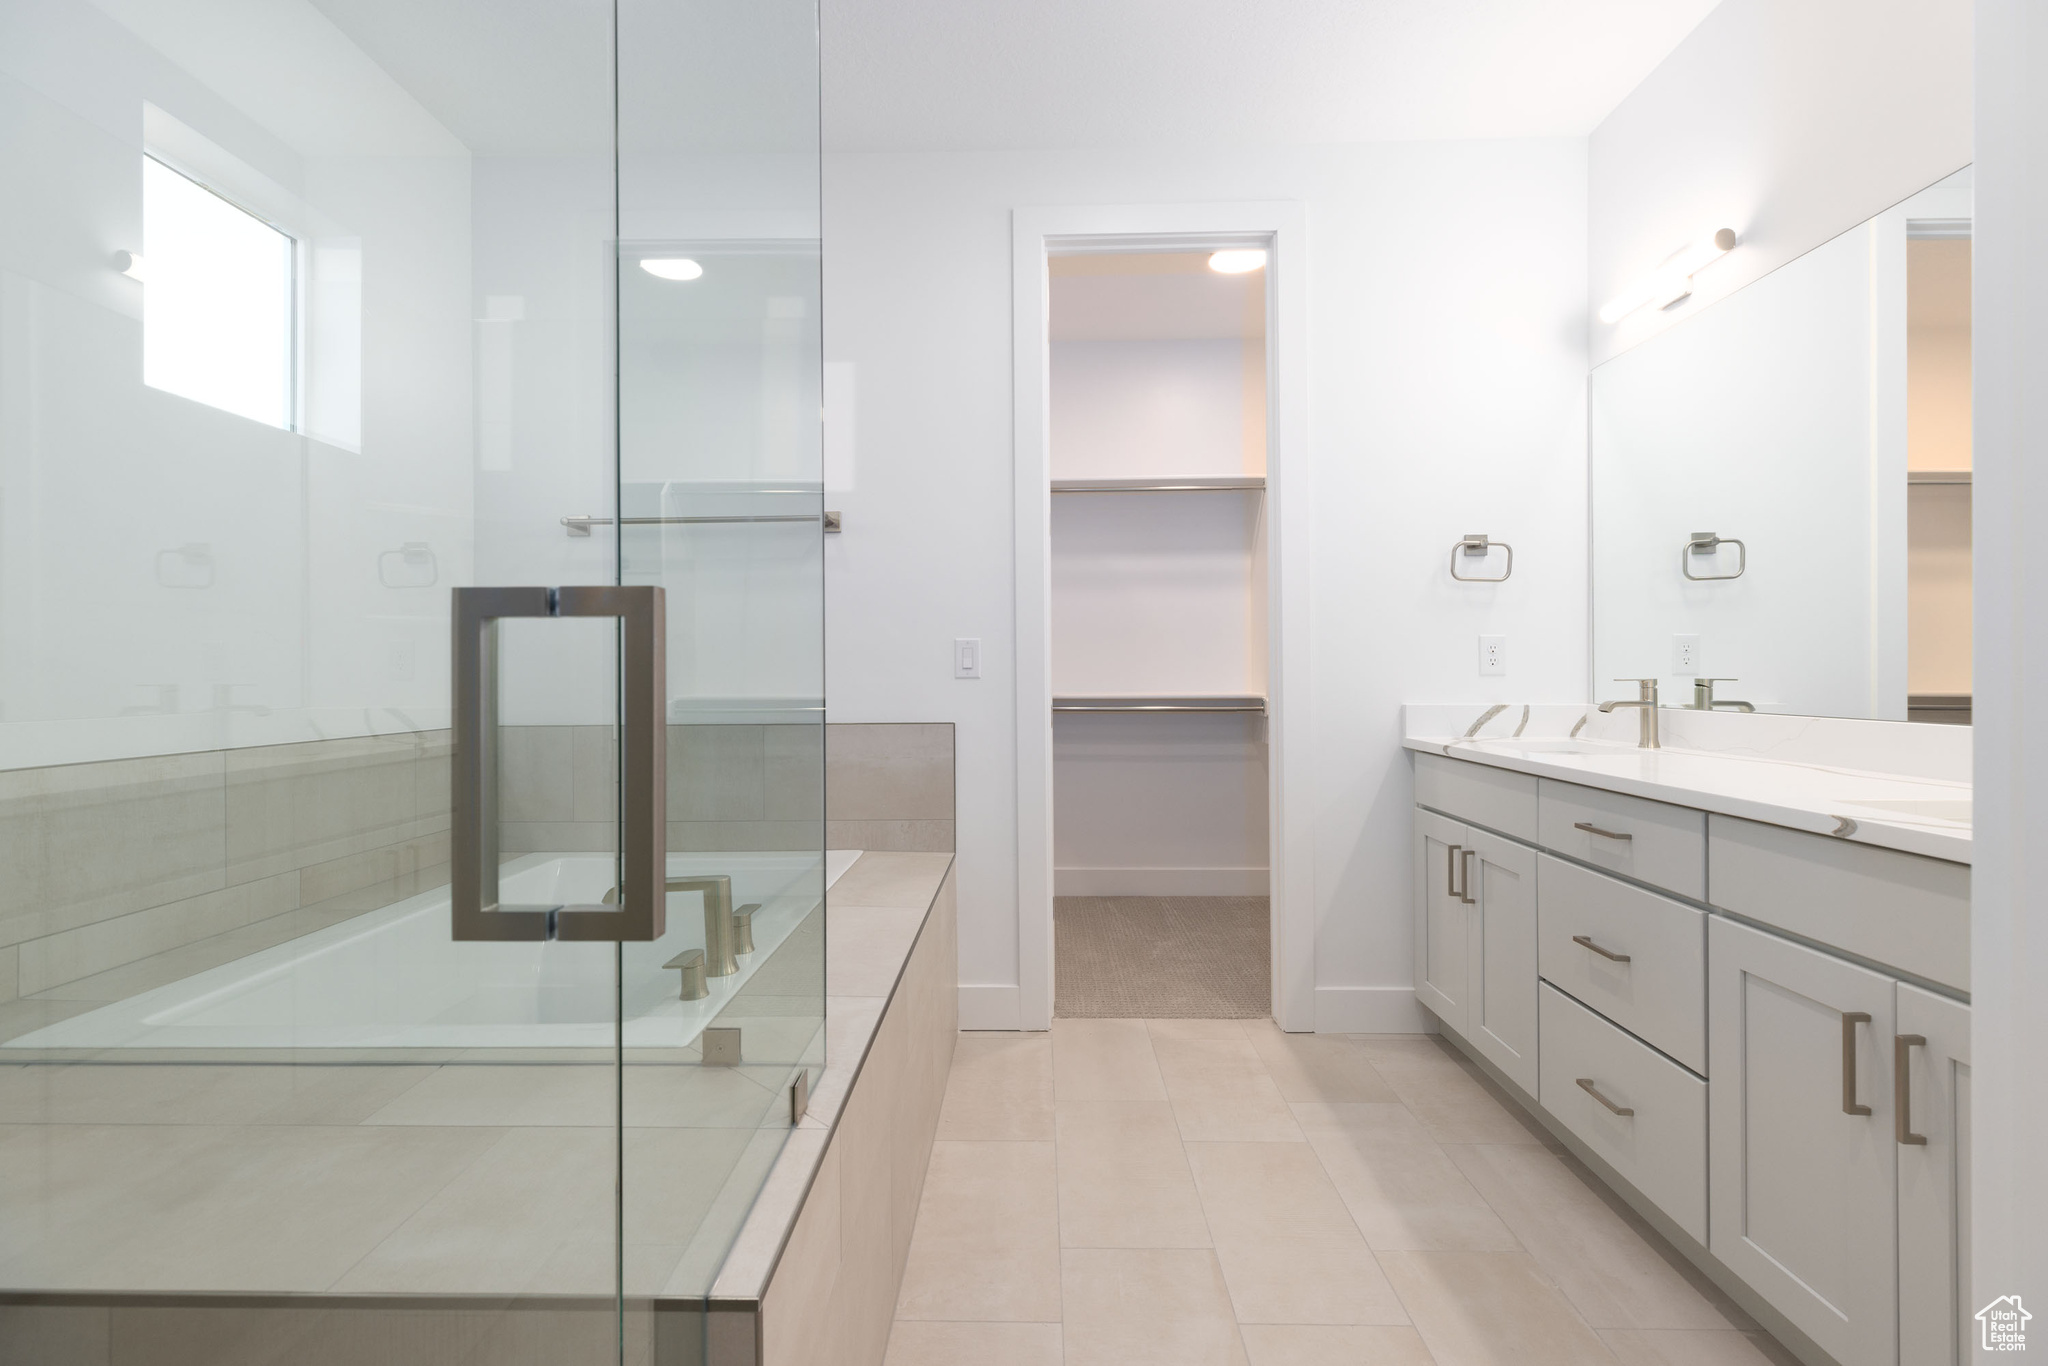 Bathroom with tile flooring, vanity with extensive cabinet space, and an enclosed shower